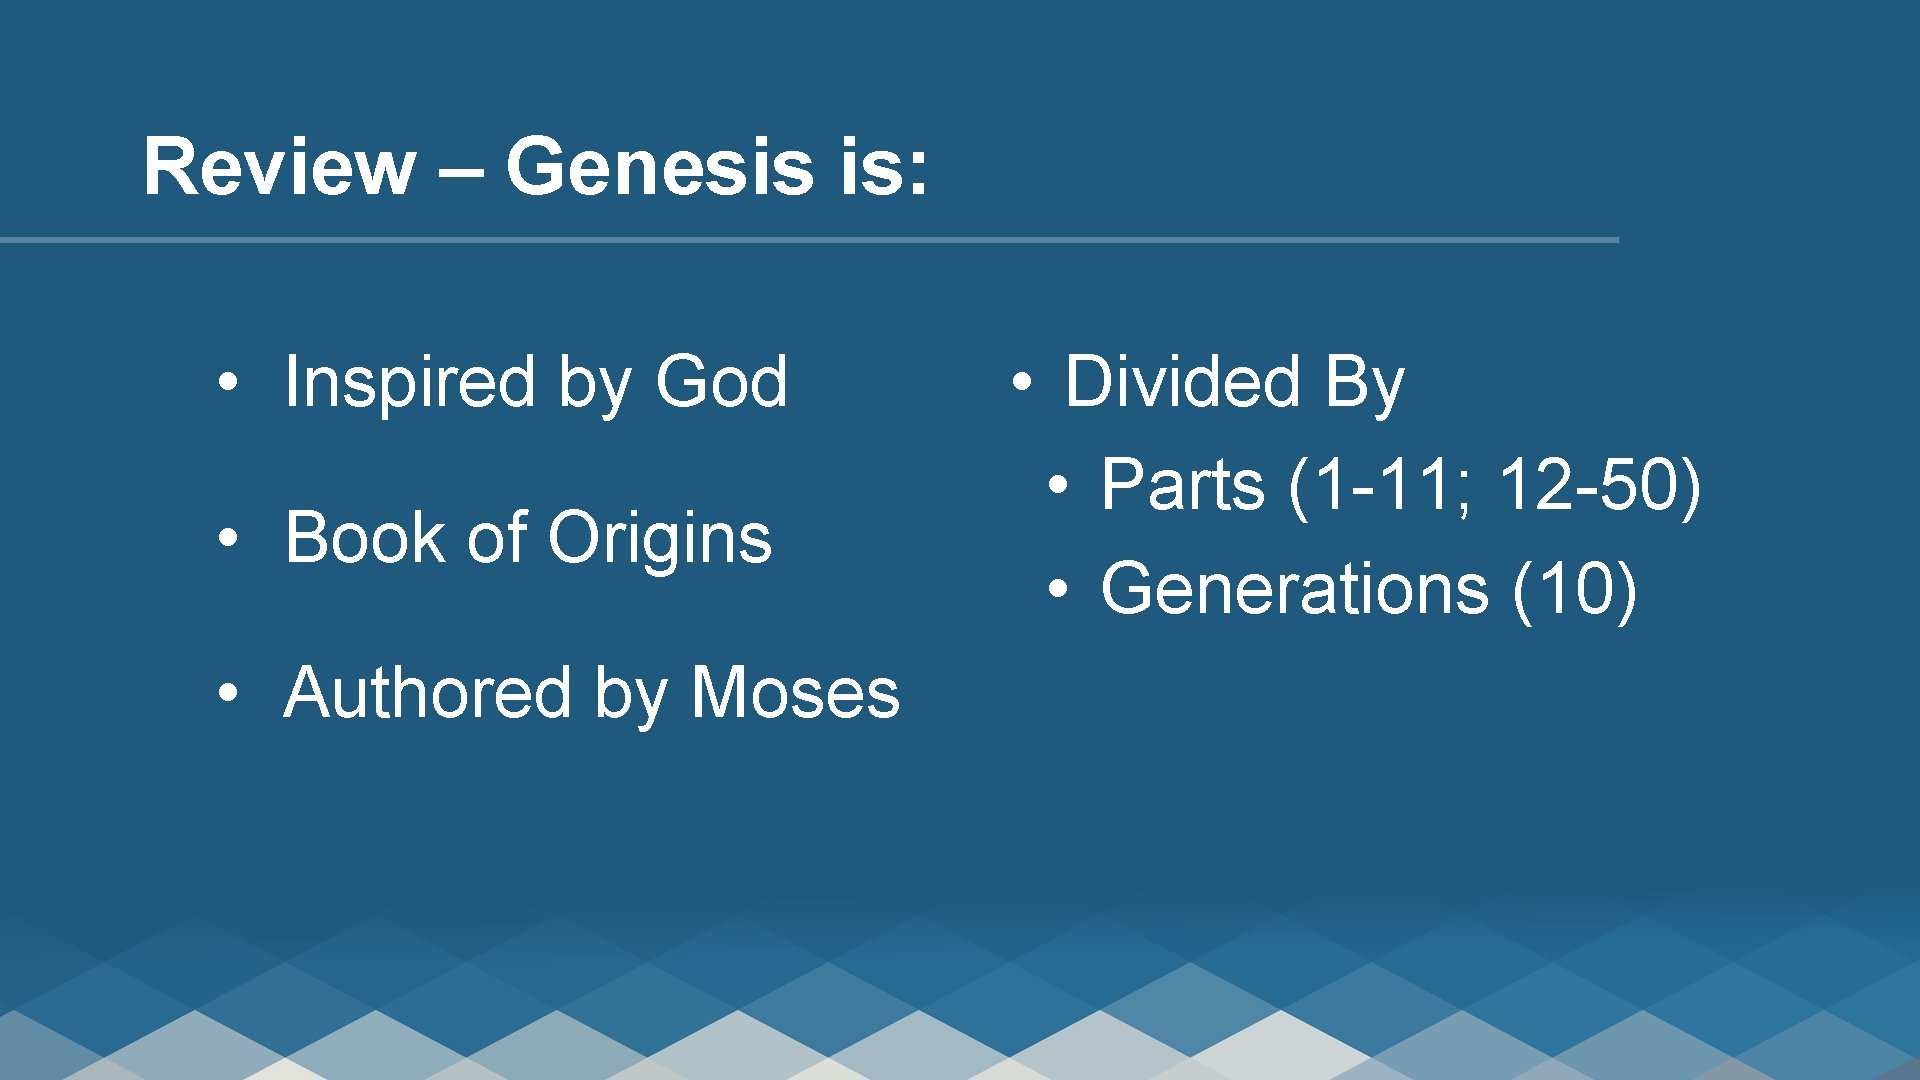 Review – Genesis is: • Inspired by God • Book of Origins • Authored